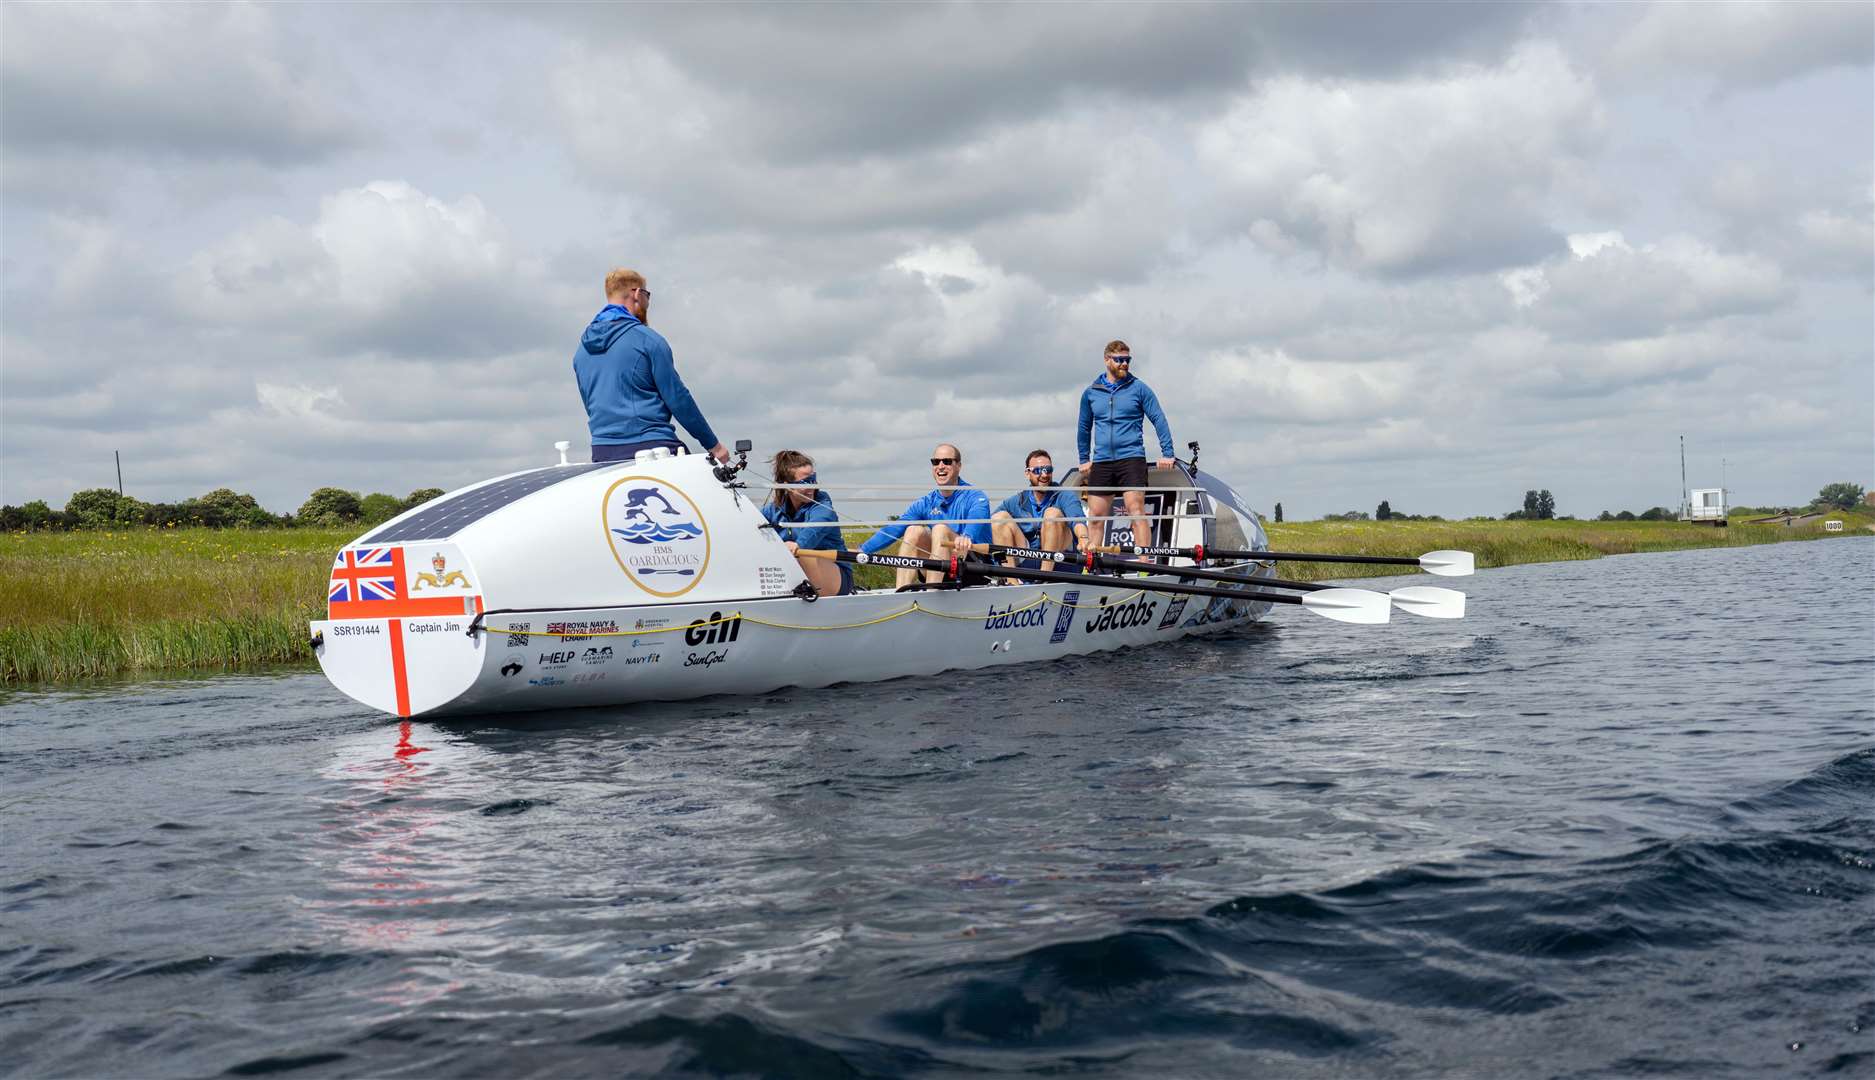 The Prince of Wales with members of the HMS Oardacious crew as they took part in a training session on Dorney Lake, Windsor in Buckinghamshire (Kensington Palace Copyright: The Prince and Princess of Wales/PA)